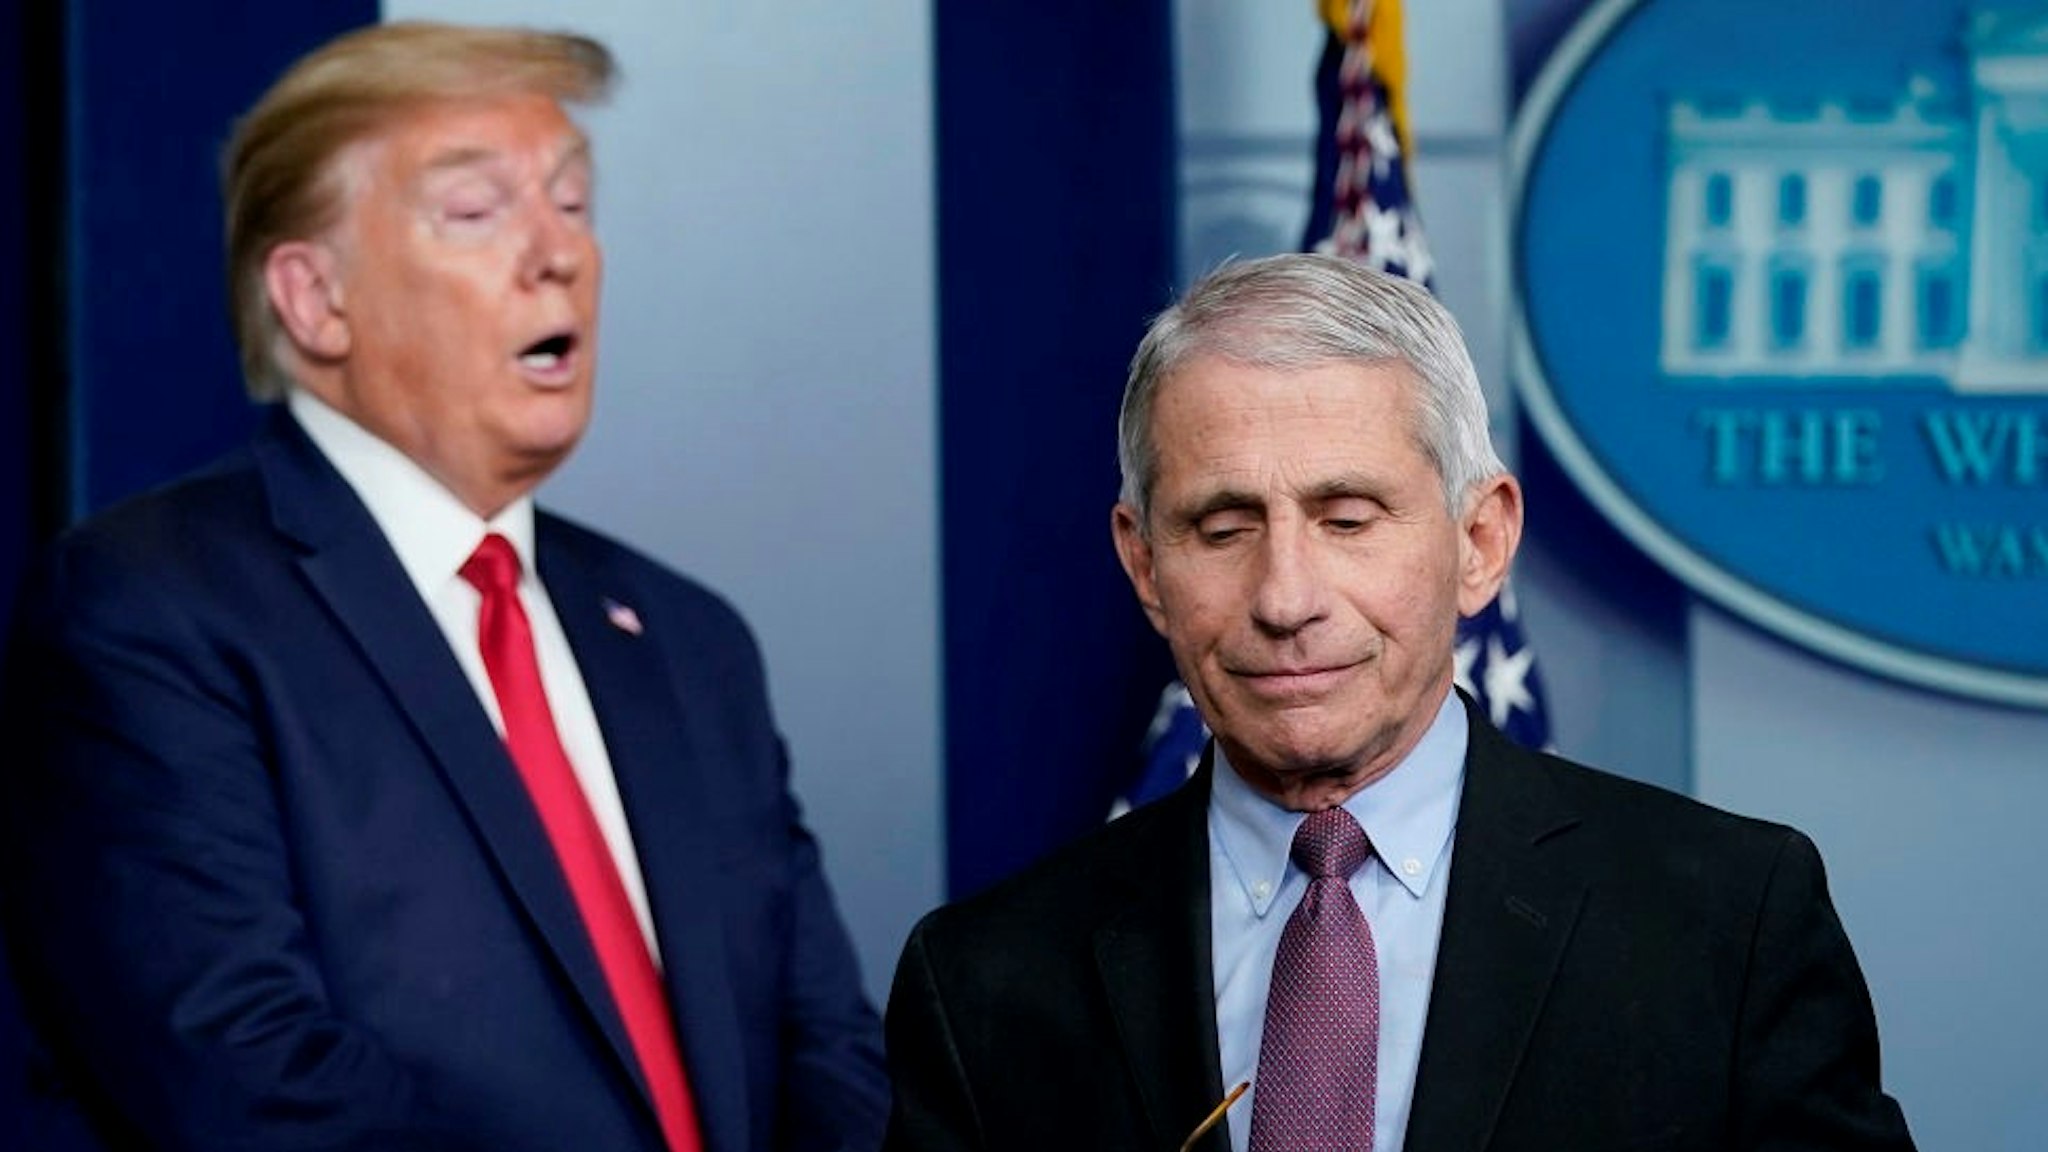 WASHINGTON, DC - APRIL 22: Dr. Anthony Fauci (R), director of the National Institute of Allergy and Infectious Diseases, and U.S. President Donald Trump participate in the daily coronavirus task force briefing at the White House on April 22, 2020 in Washington, DC. Dr. Robert Redfield, director of the Centers for Disease Control, has said that a potential second wave of coronavirus later this year could flare up again and coincide with flu season. (Photo by